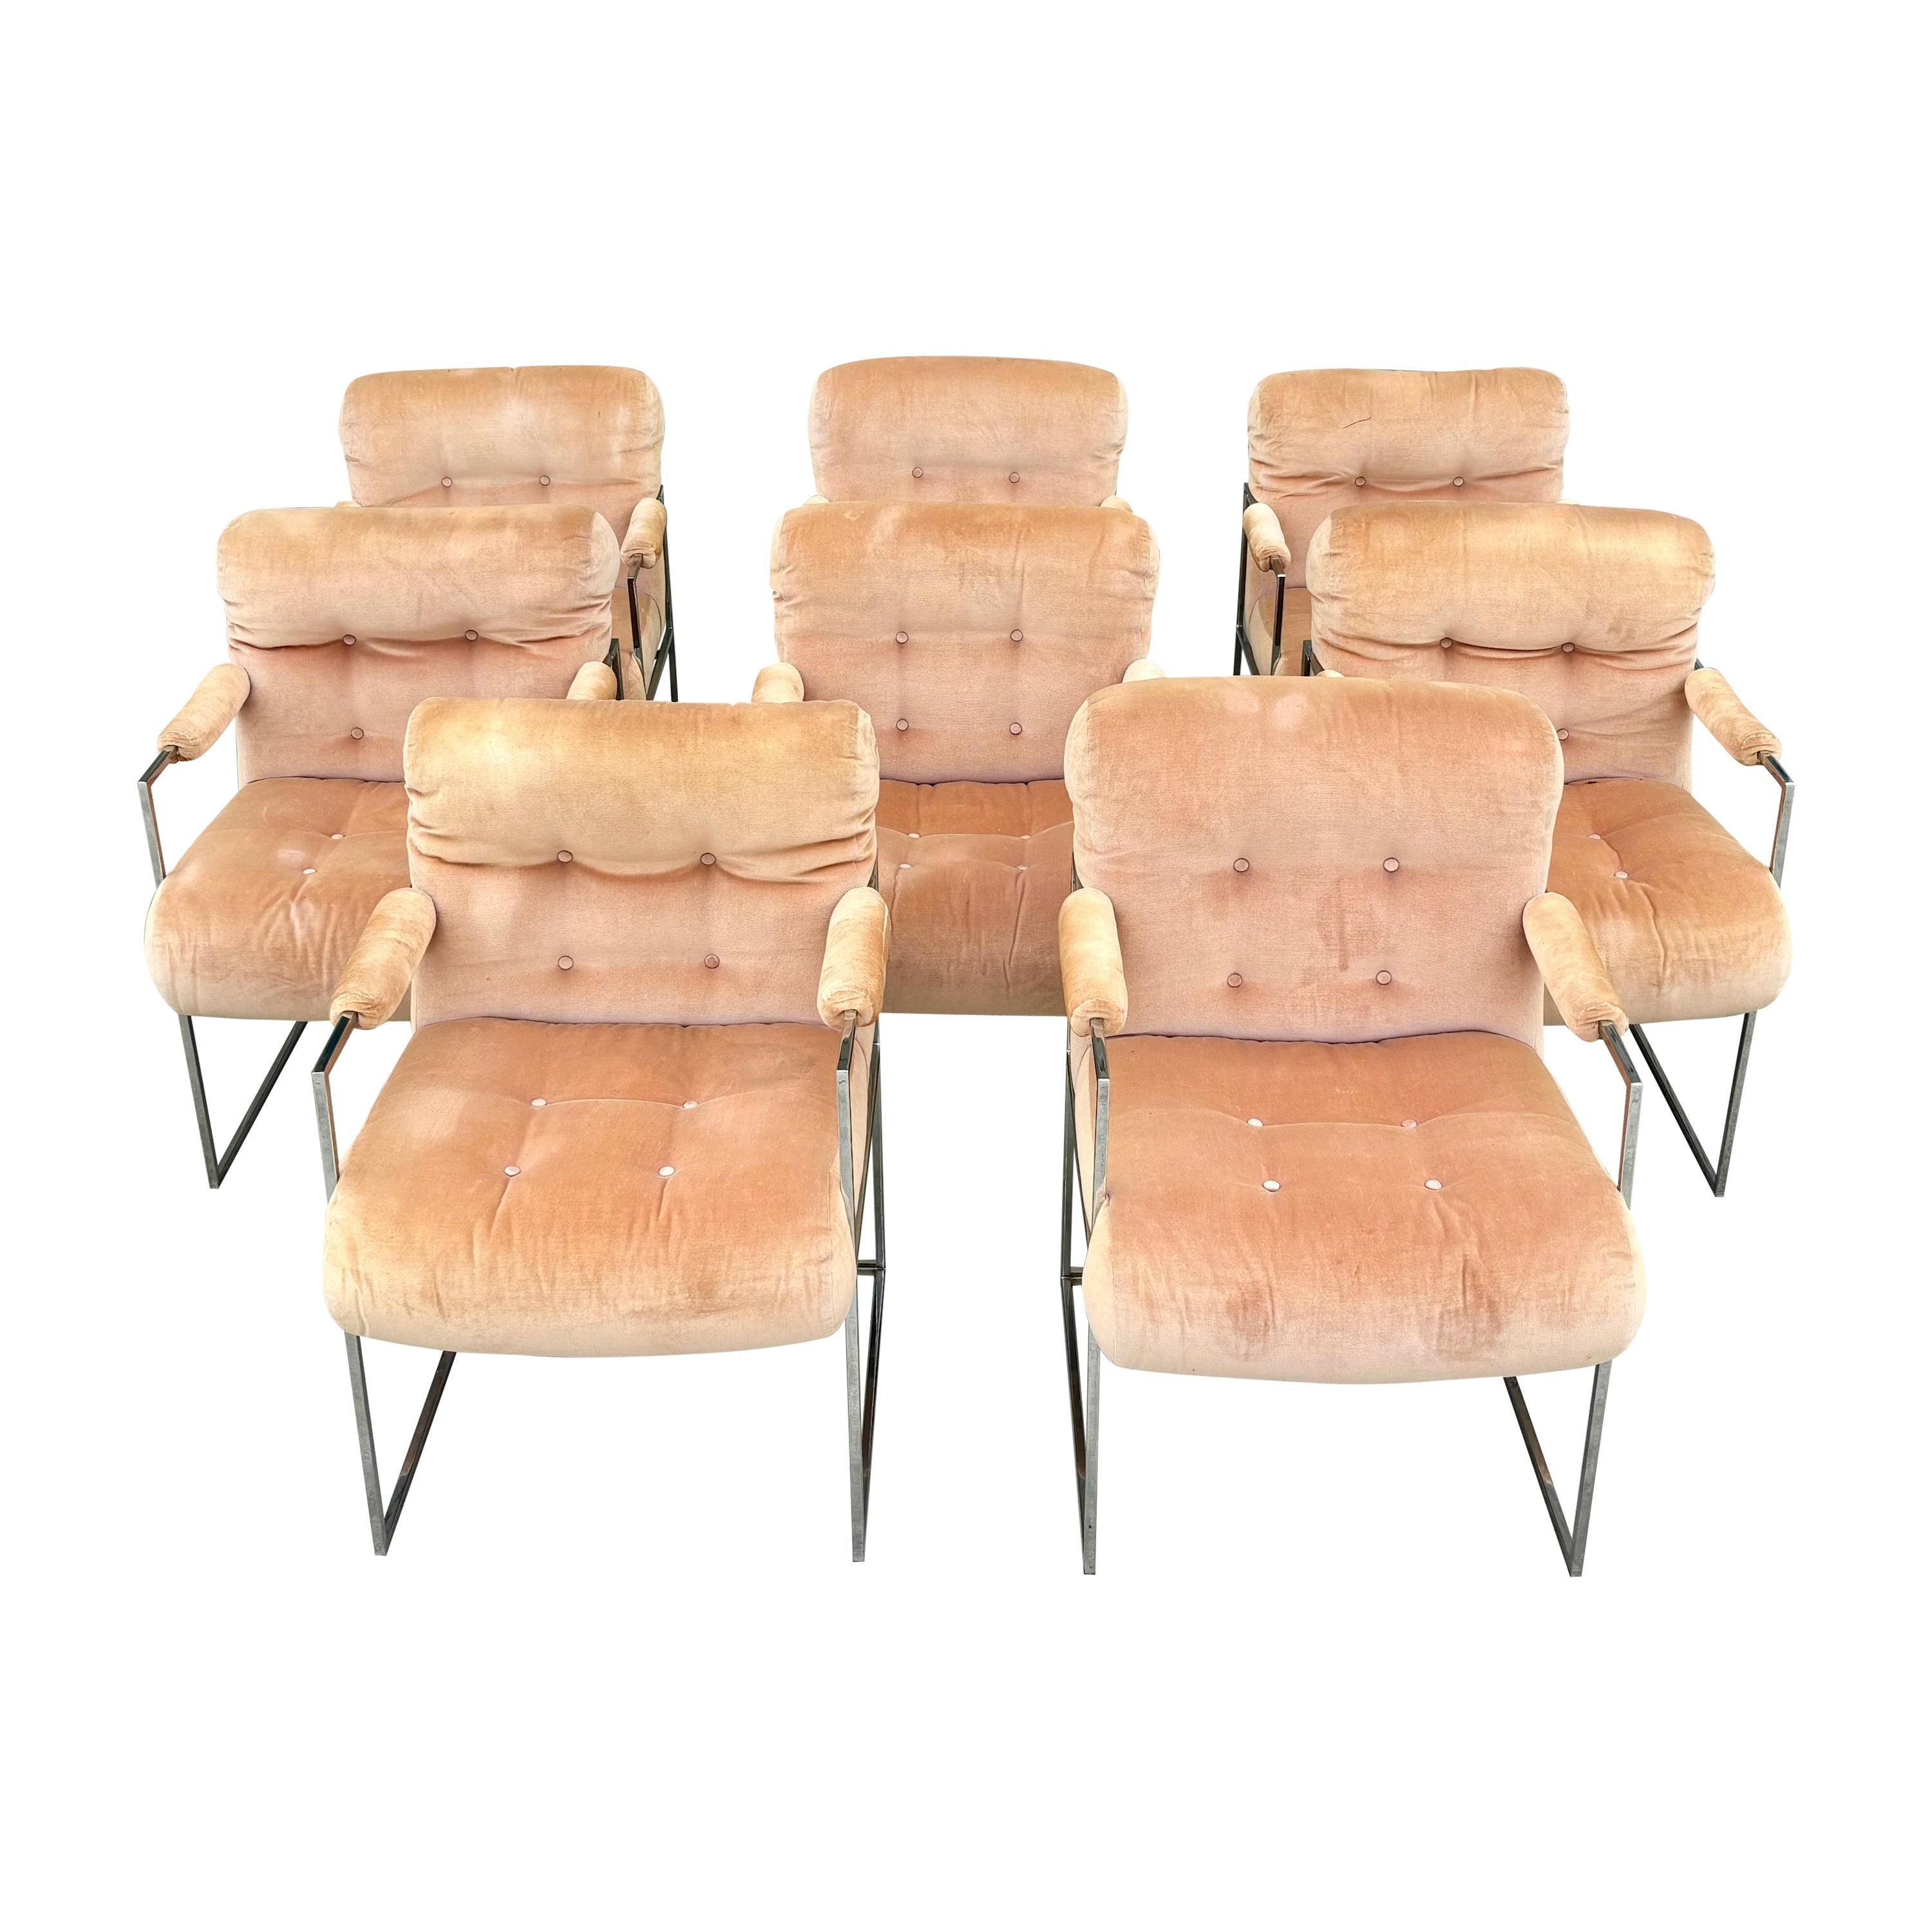 1960s Mid Century Dining Chairs by Milo Baughman for Thayer Coggin - Set of 8 For Sale